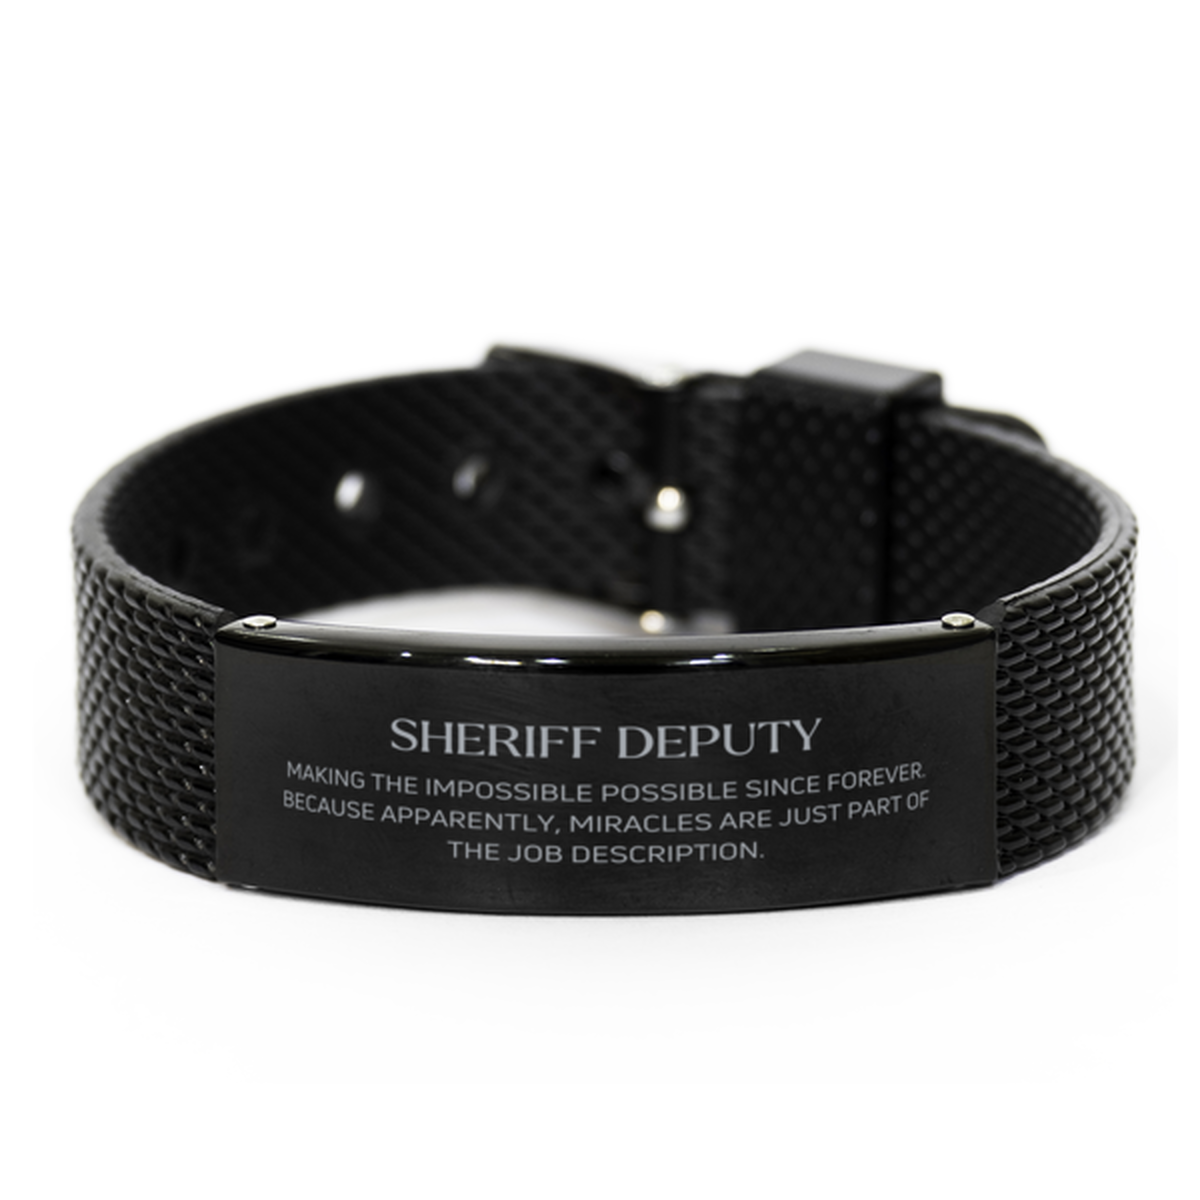 Funny Sheriff Deputy Gifts, Miracles are just part of the job description, Inspirational Birthday Black Shark Mesh Bracelet For Sheriff Deputy, Men, Women, Coworkers, Friends, Boss